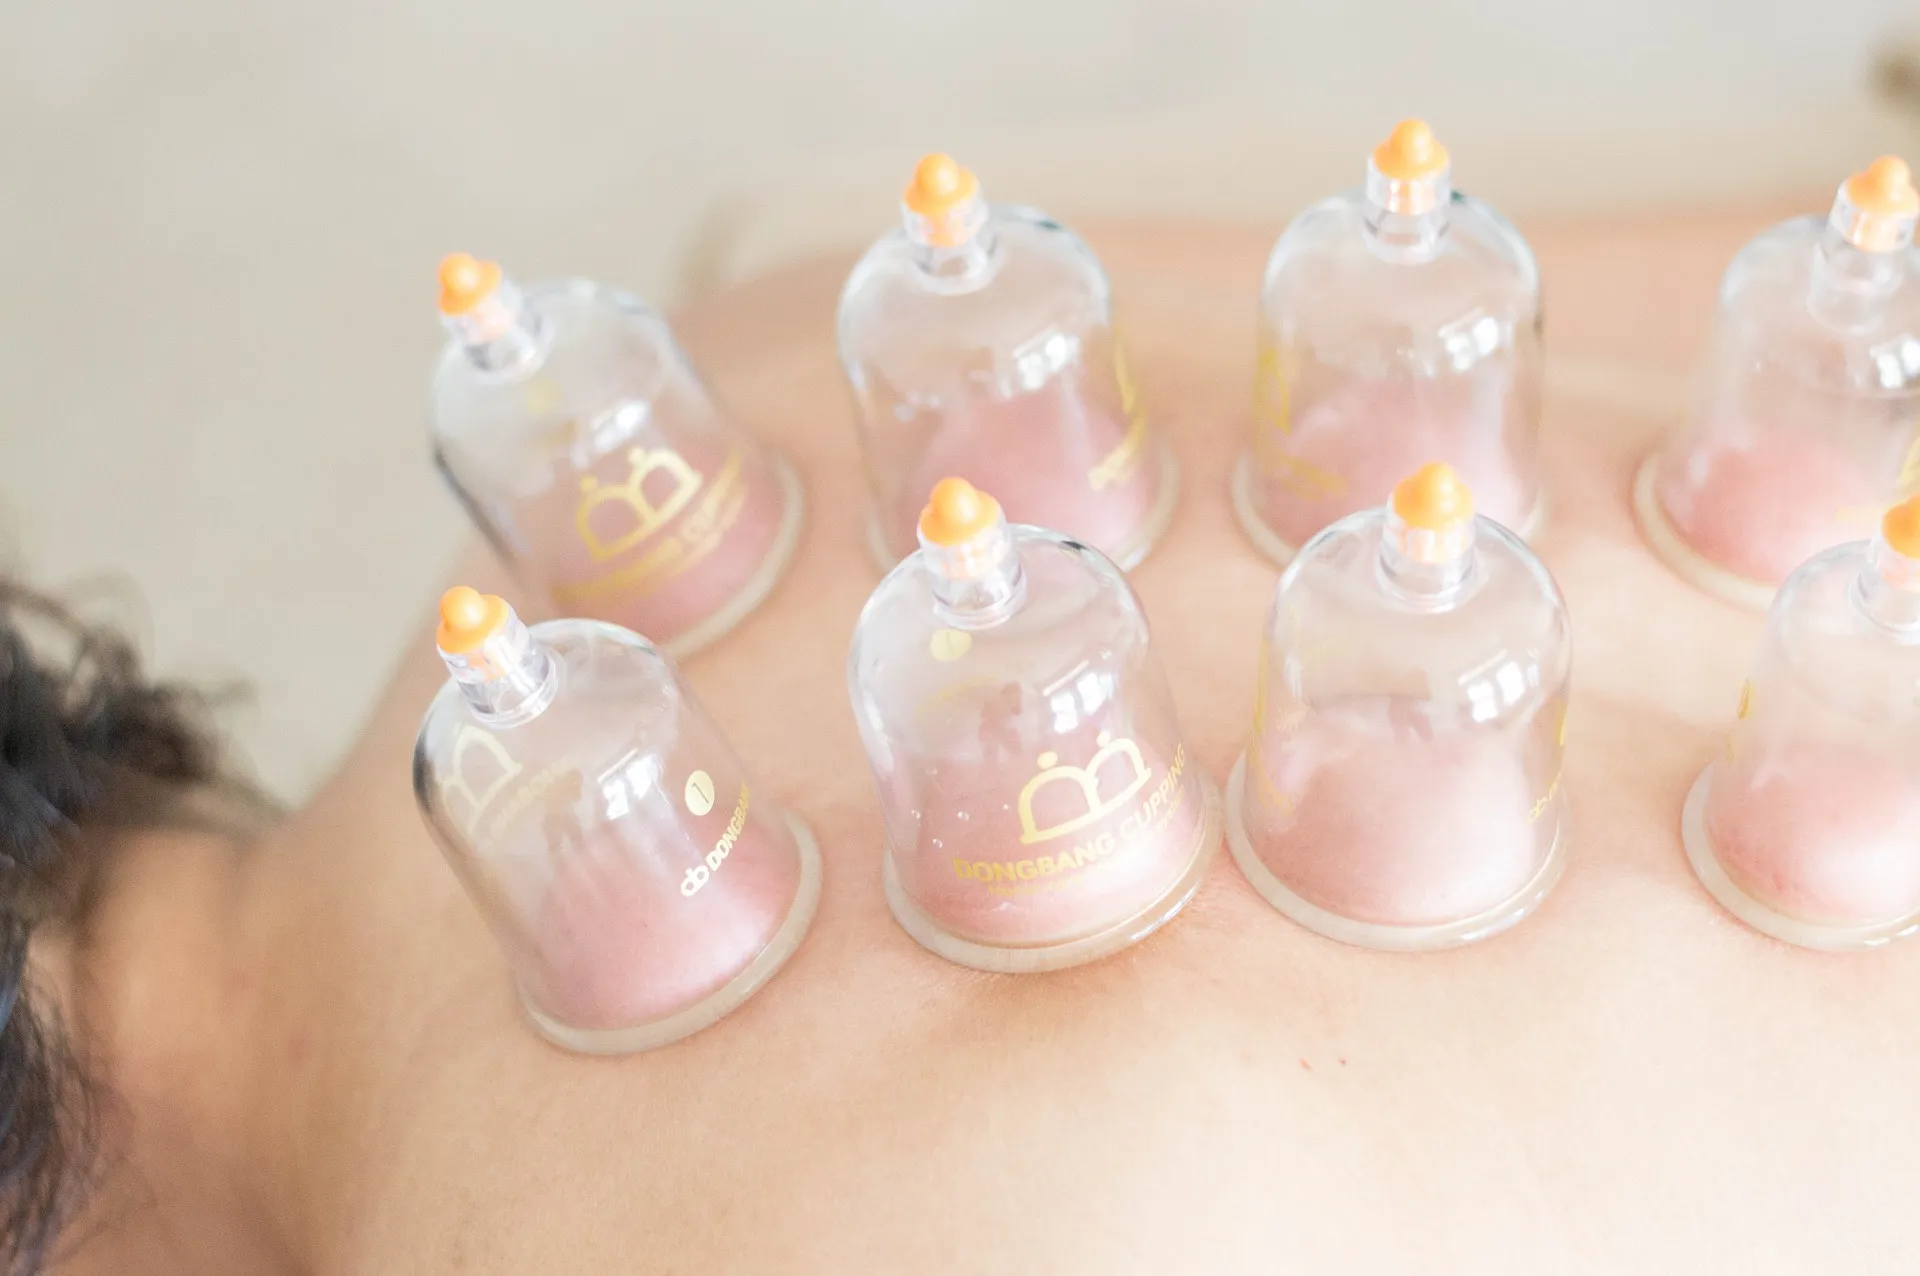 Cupping therapy. (Anti-inflammatory)